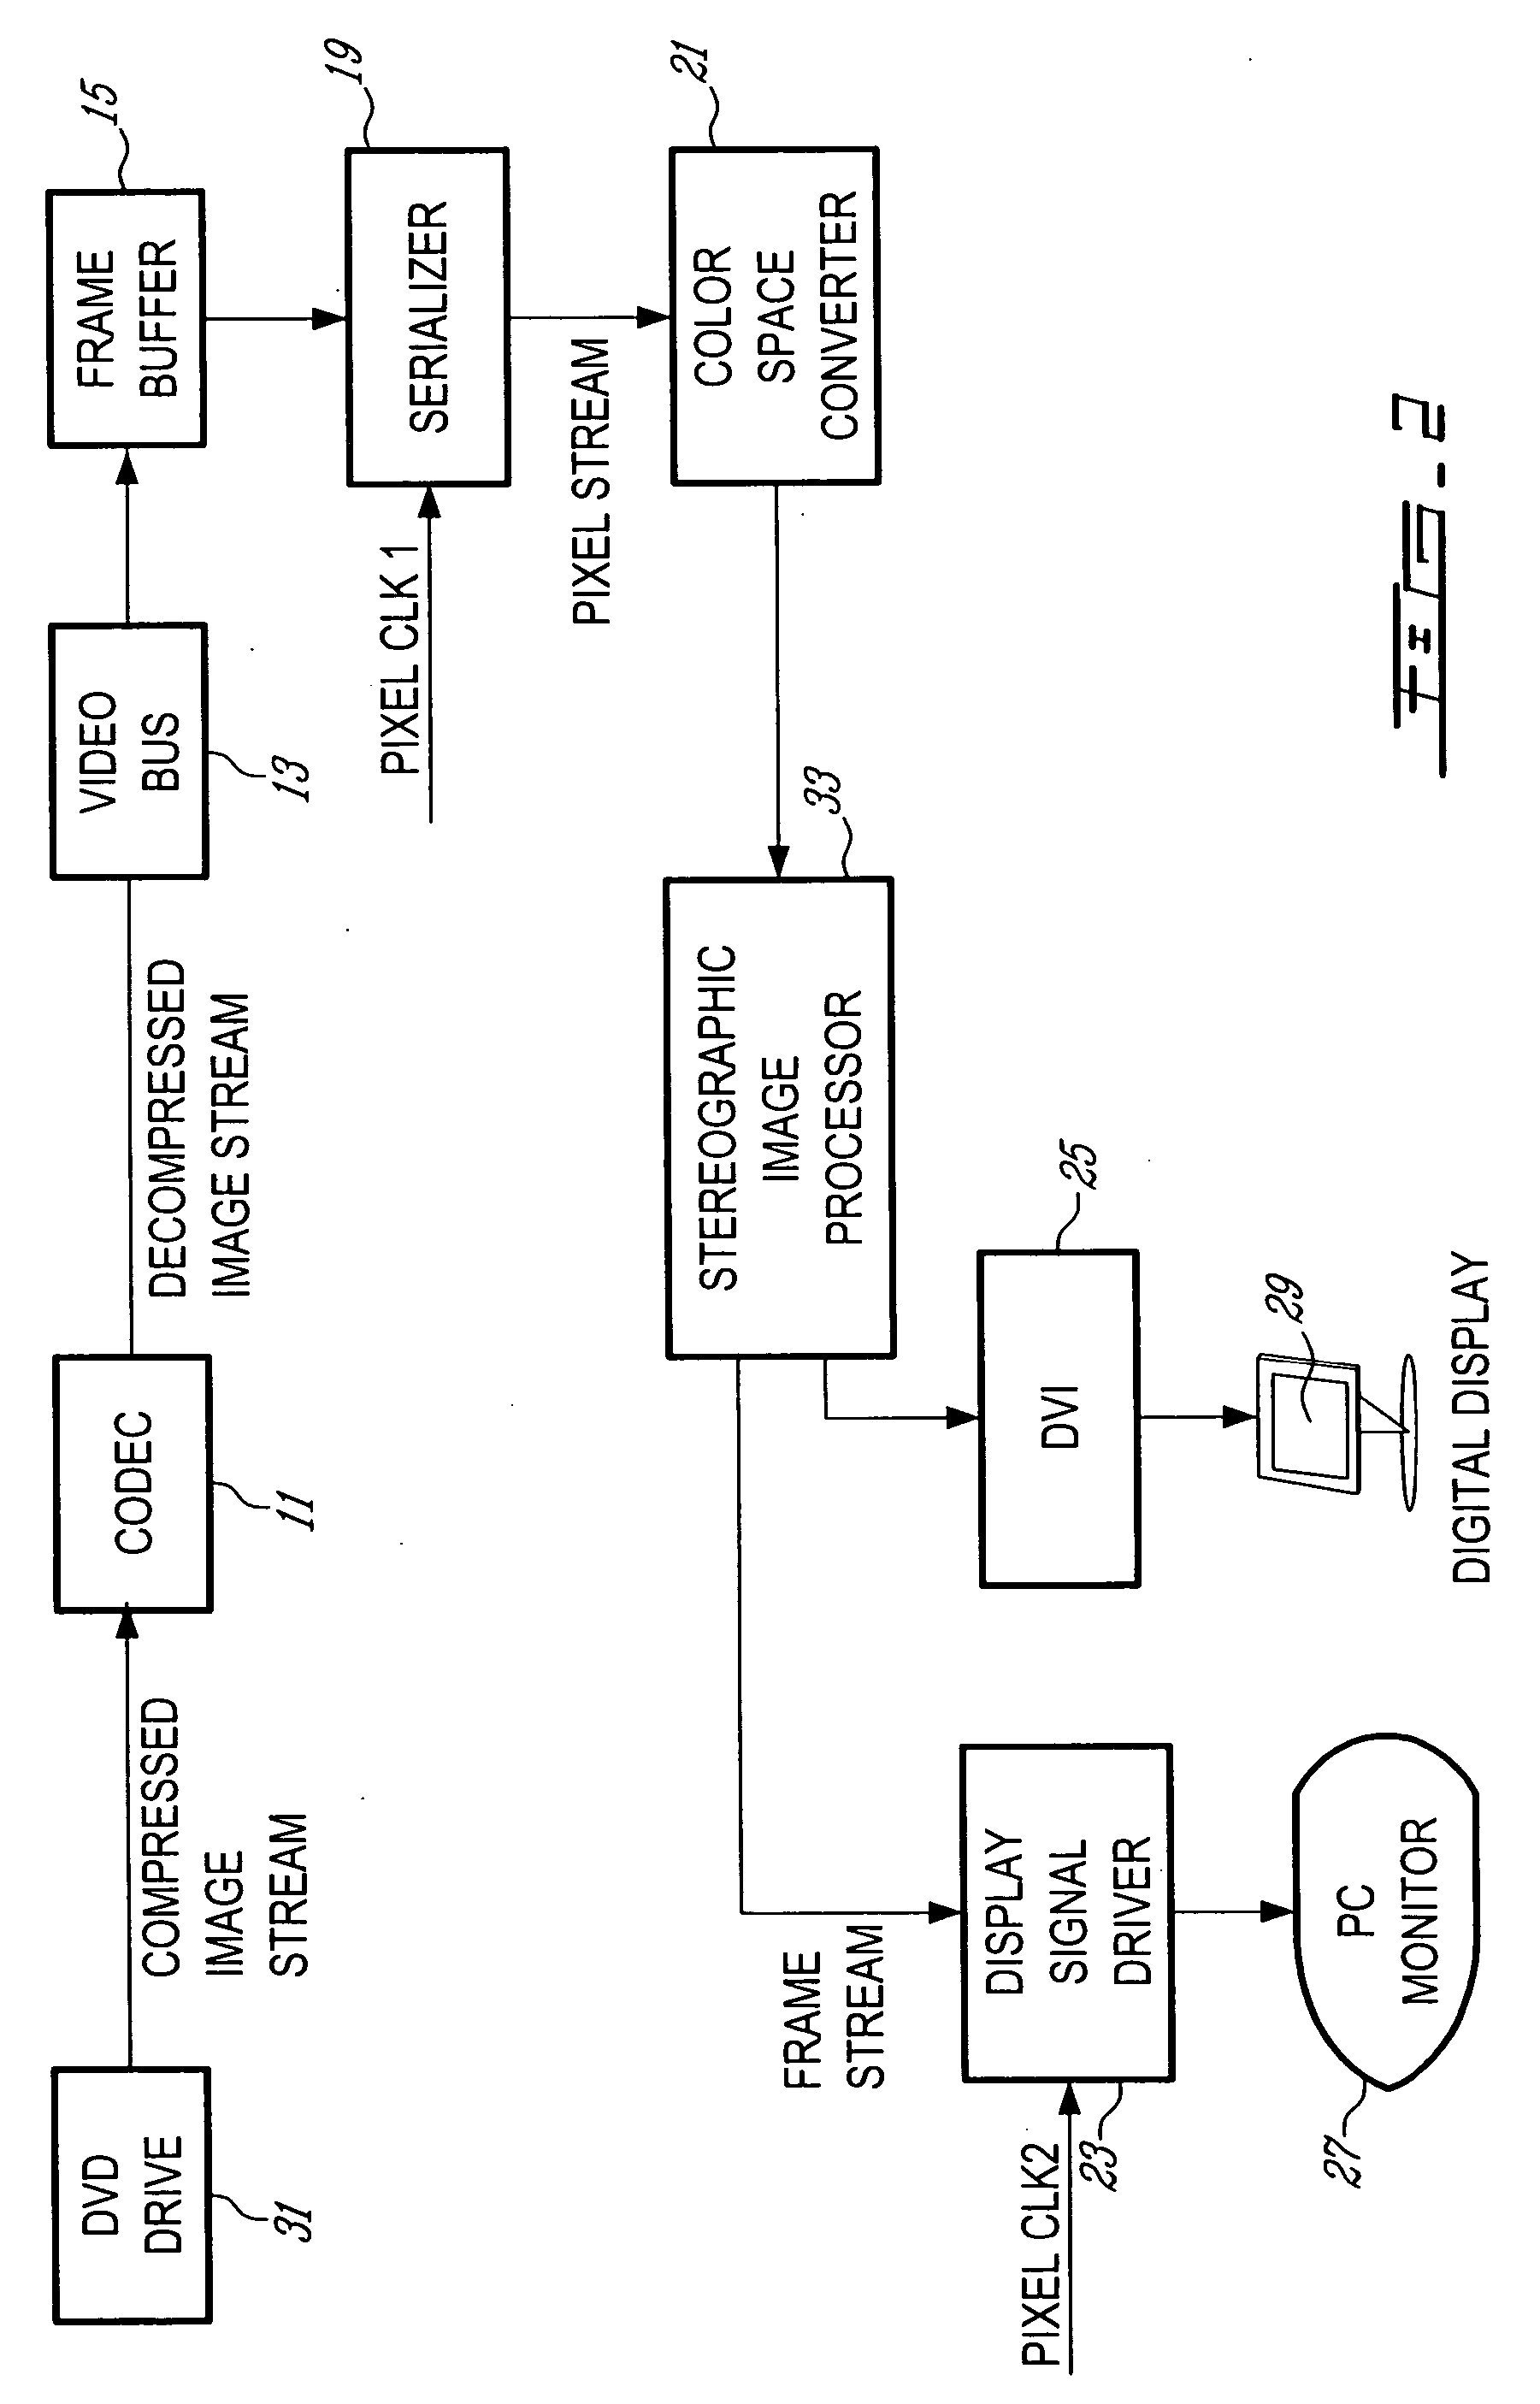 Apparatus for processing a stereoscopic image stream